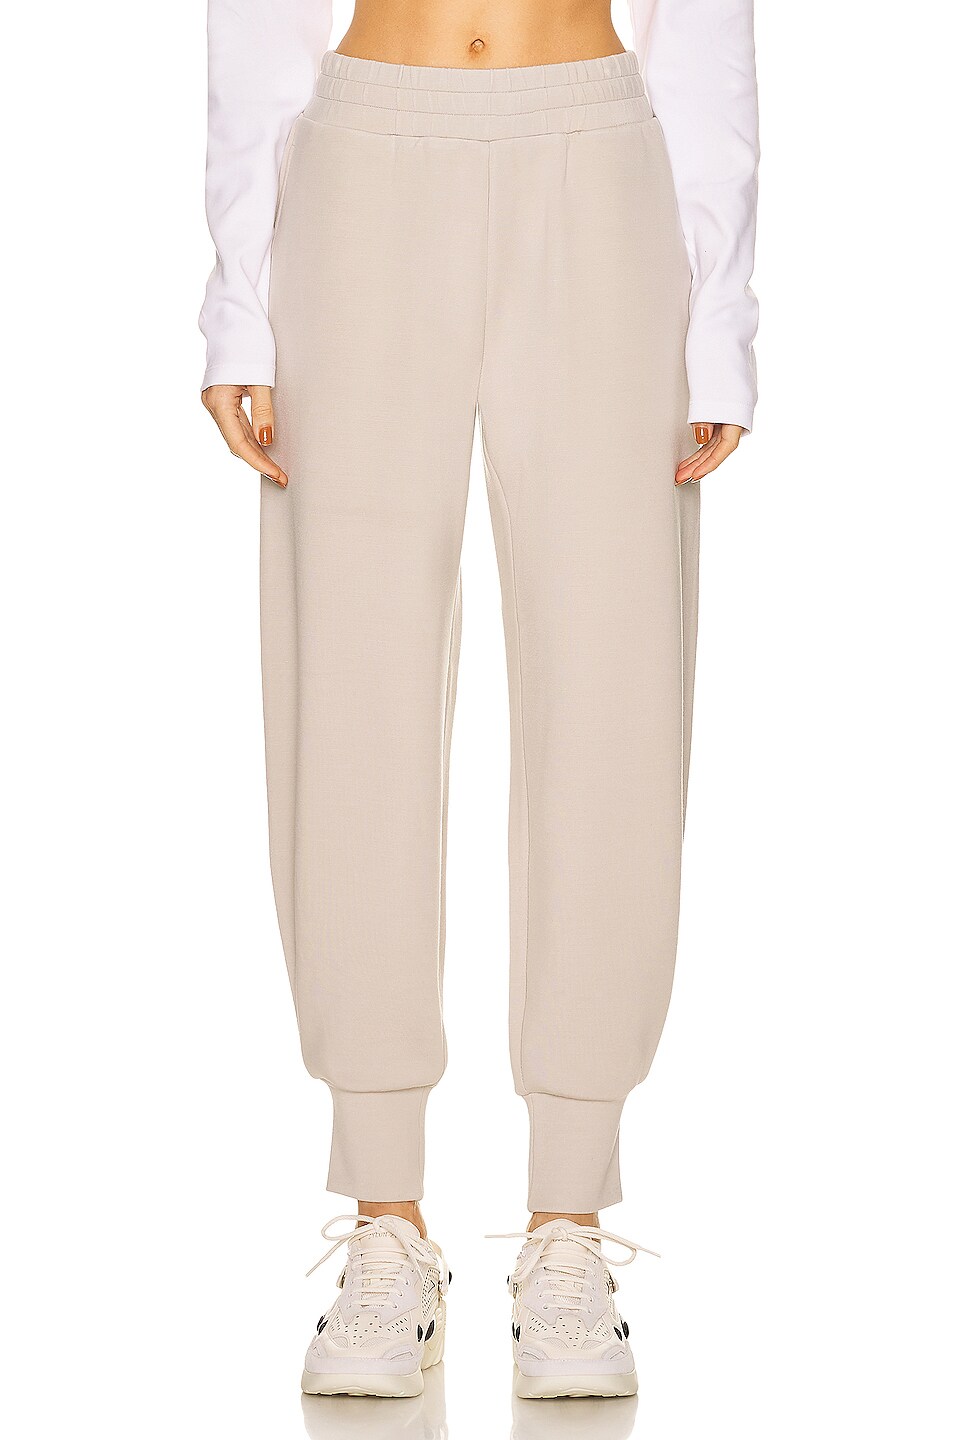 Image 1 of Varley Allen Sweatpant in Silver Lining